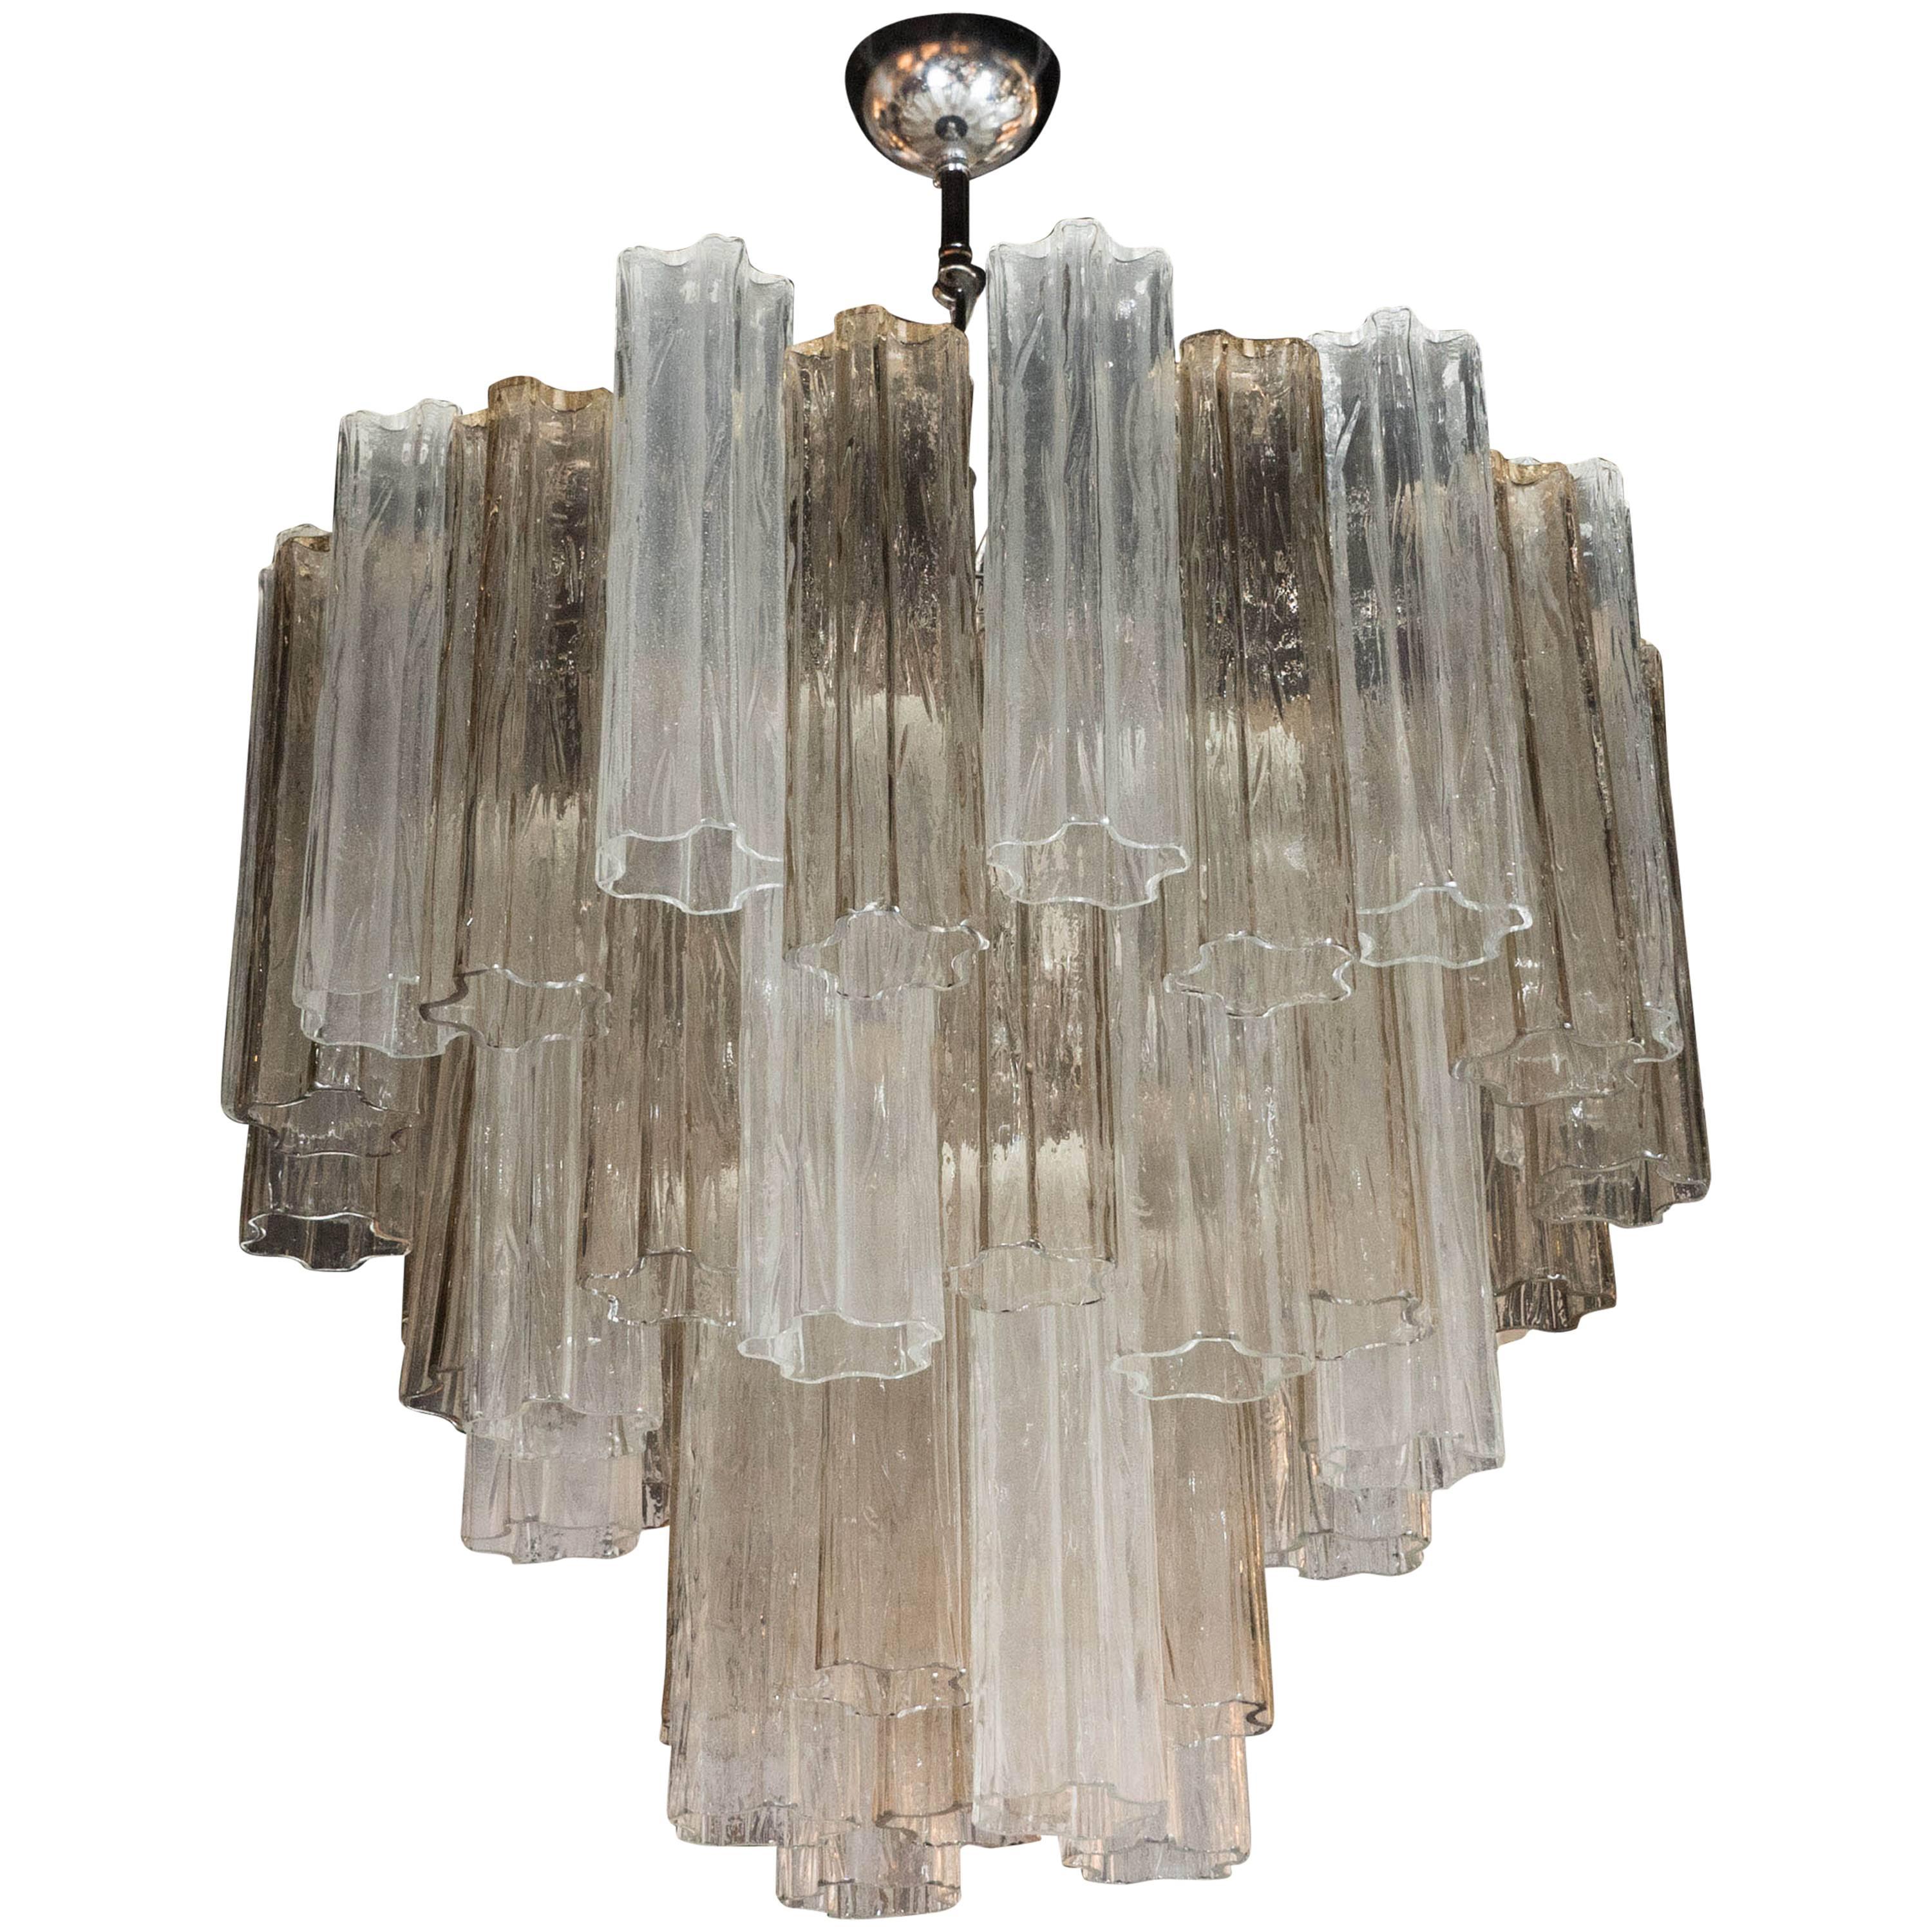 Murano Three-Tier Smoked and Clear Tronchi Chandelier with Chrome Fittings